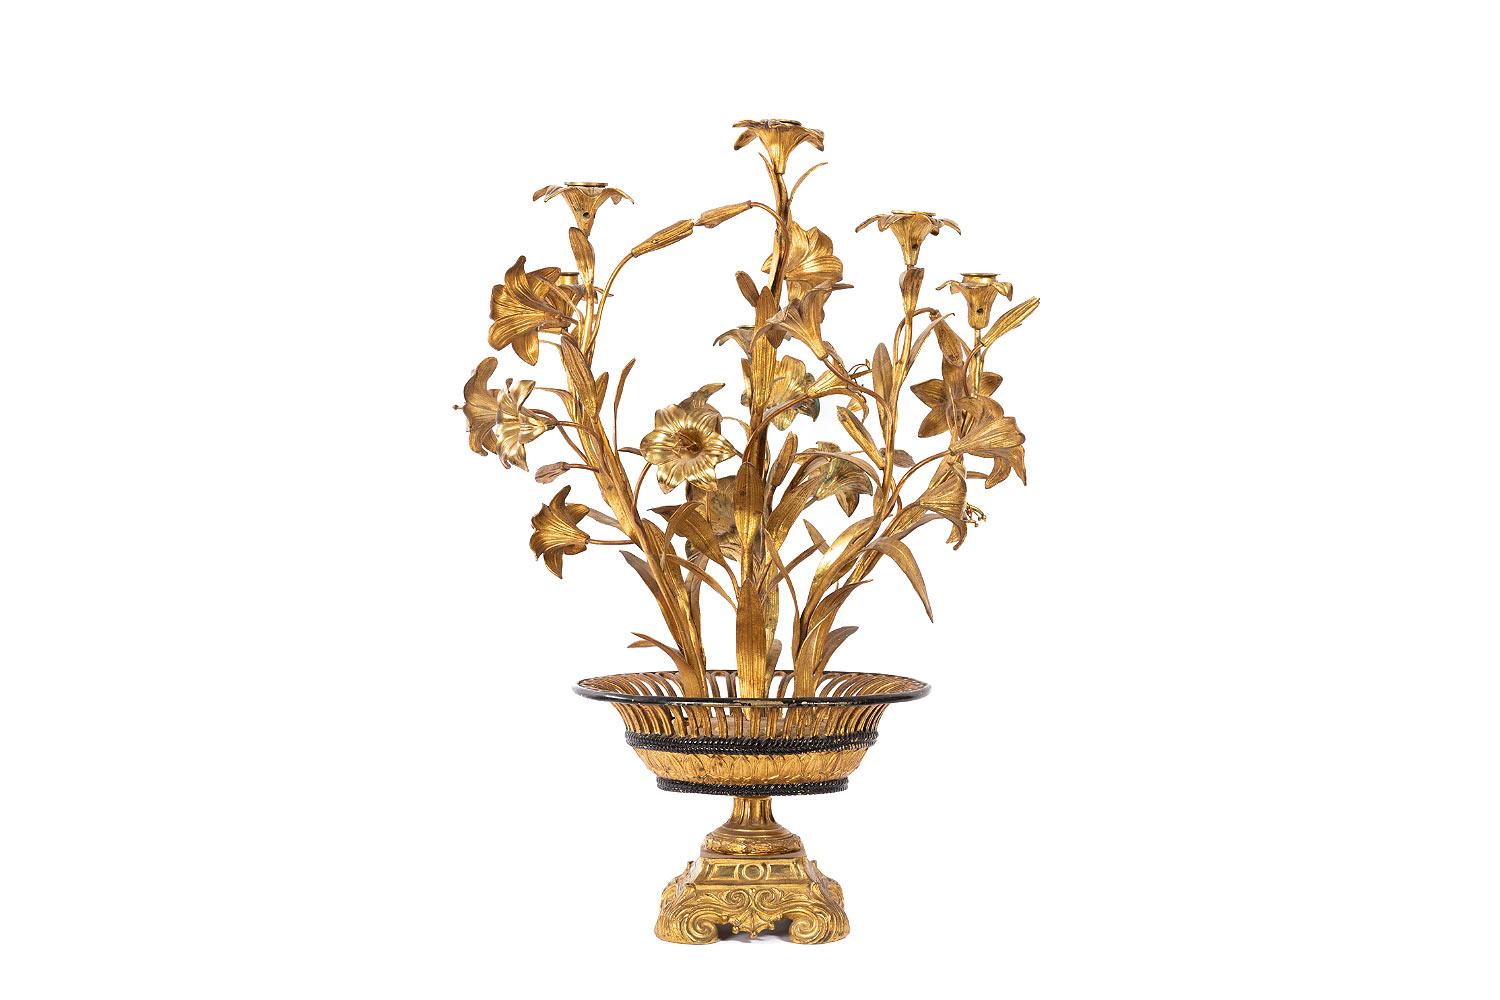 Six lights flowered candelabra in gilt brass and bronze representing a basket filled with flowers, standing on a four scrolled legs base topped by a piedouche supporting a gold and black patinated flared rim openwork basket, adorned with water